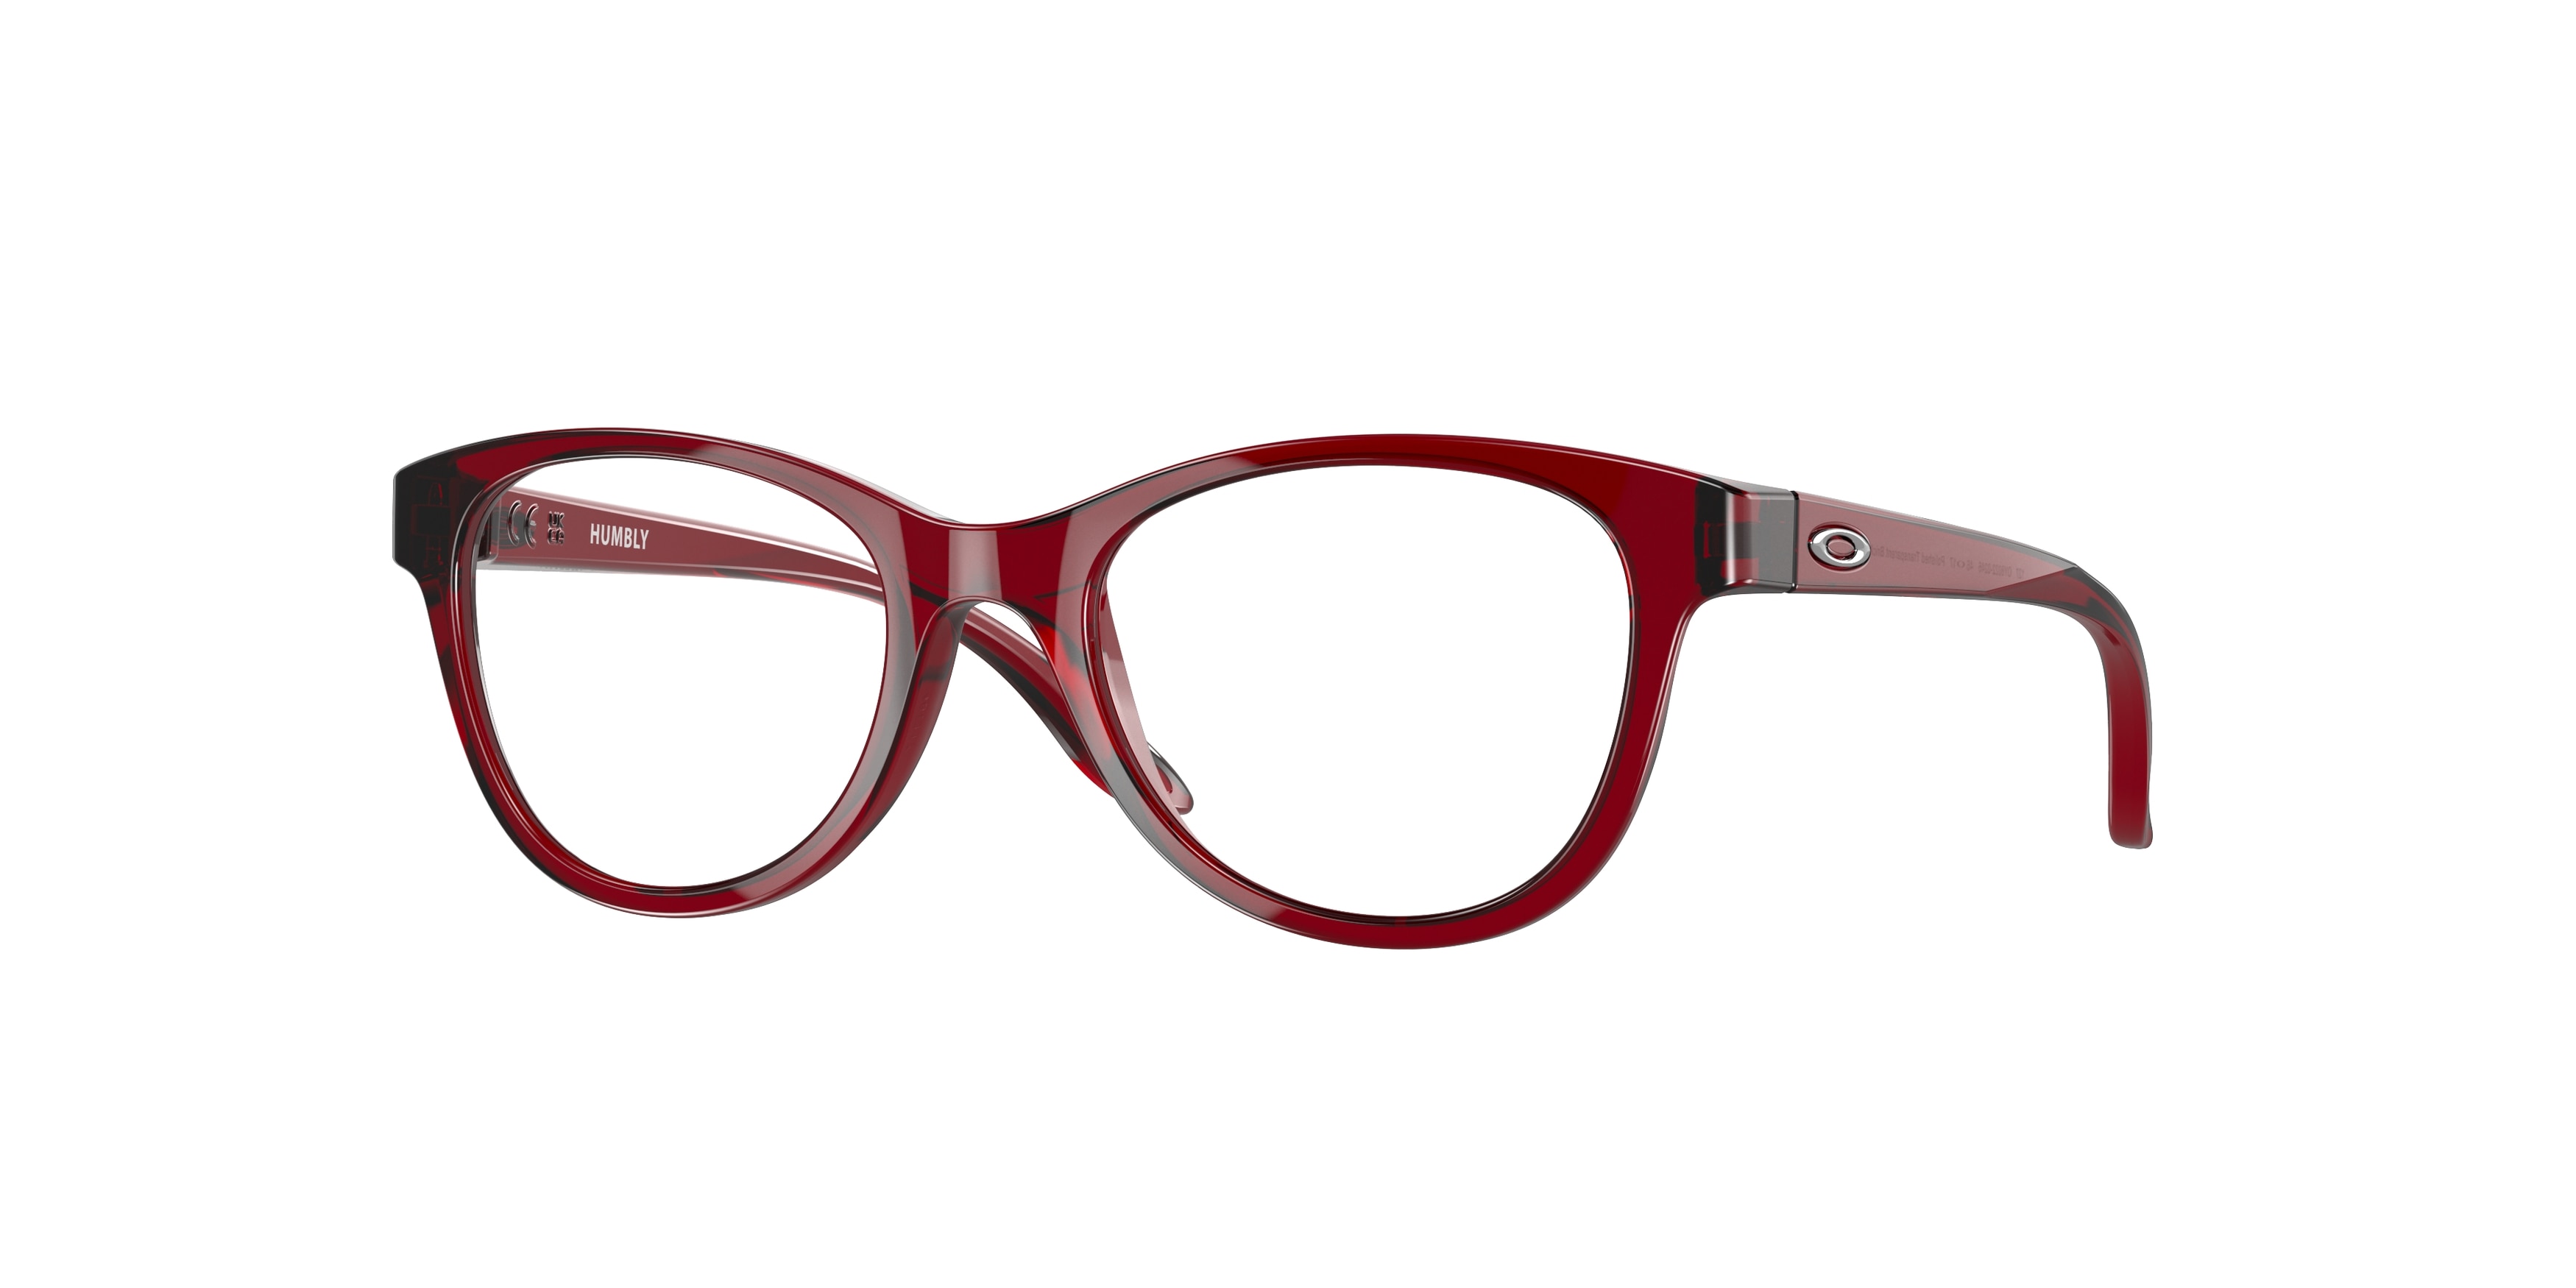 oakley_youth_0oy8022_802202_polished_transparent_brick_red_ref